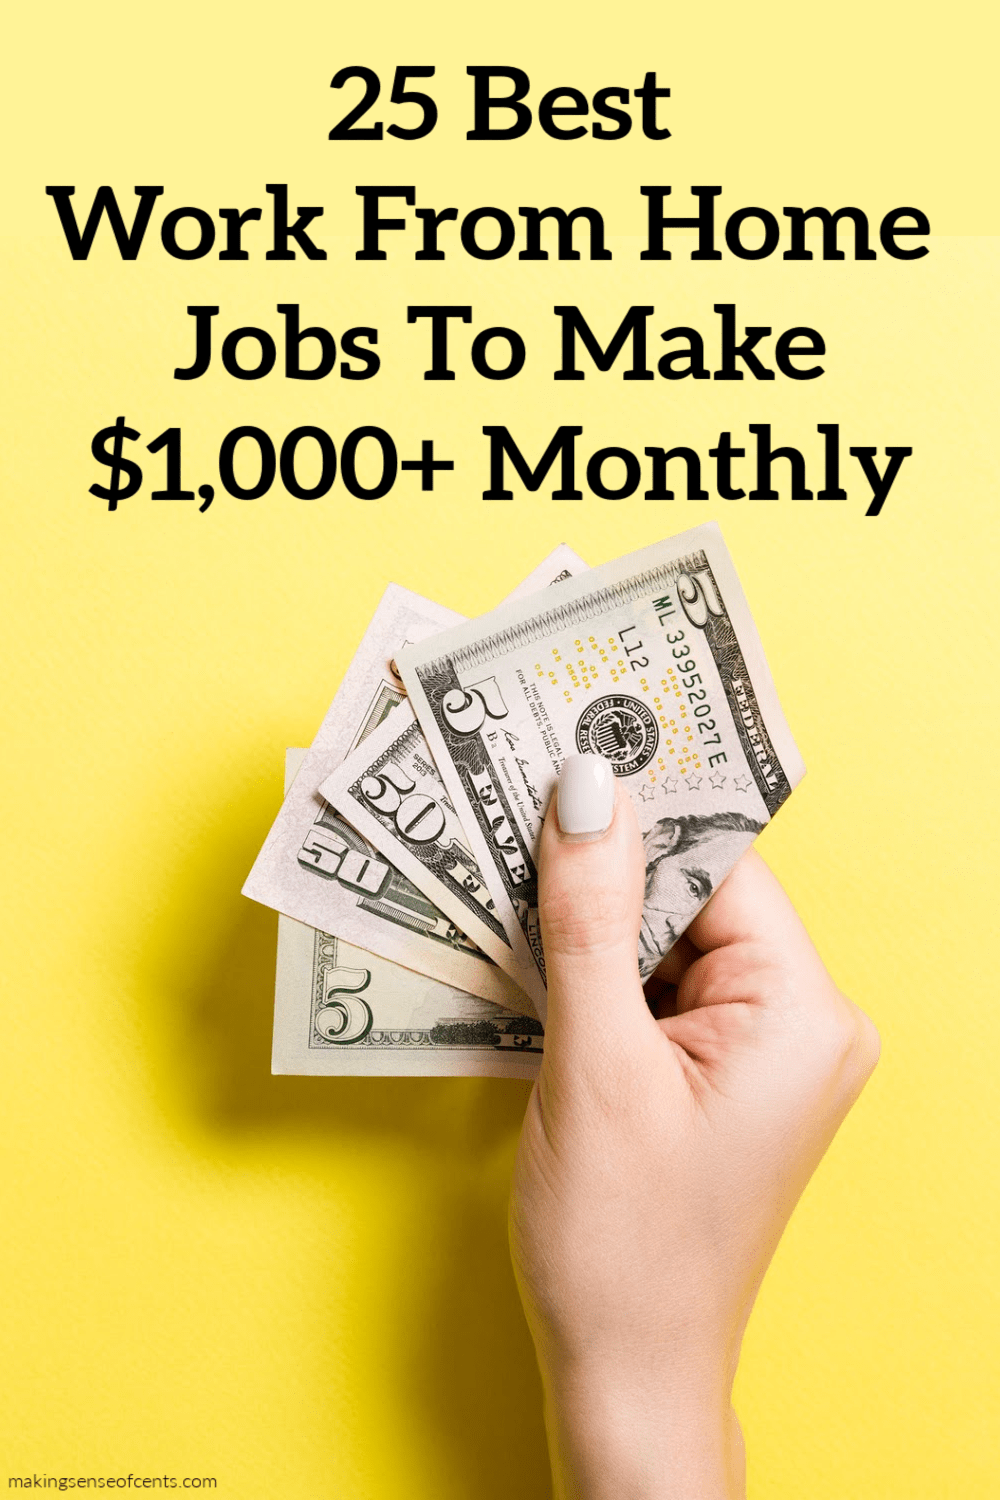 25 Best Work From Home Jobs To Make 1,000+ Monthly Hanover Mortgages